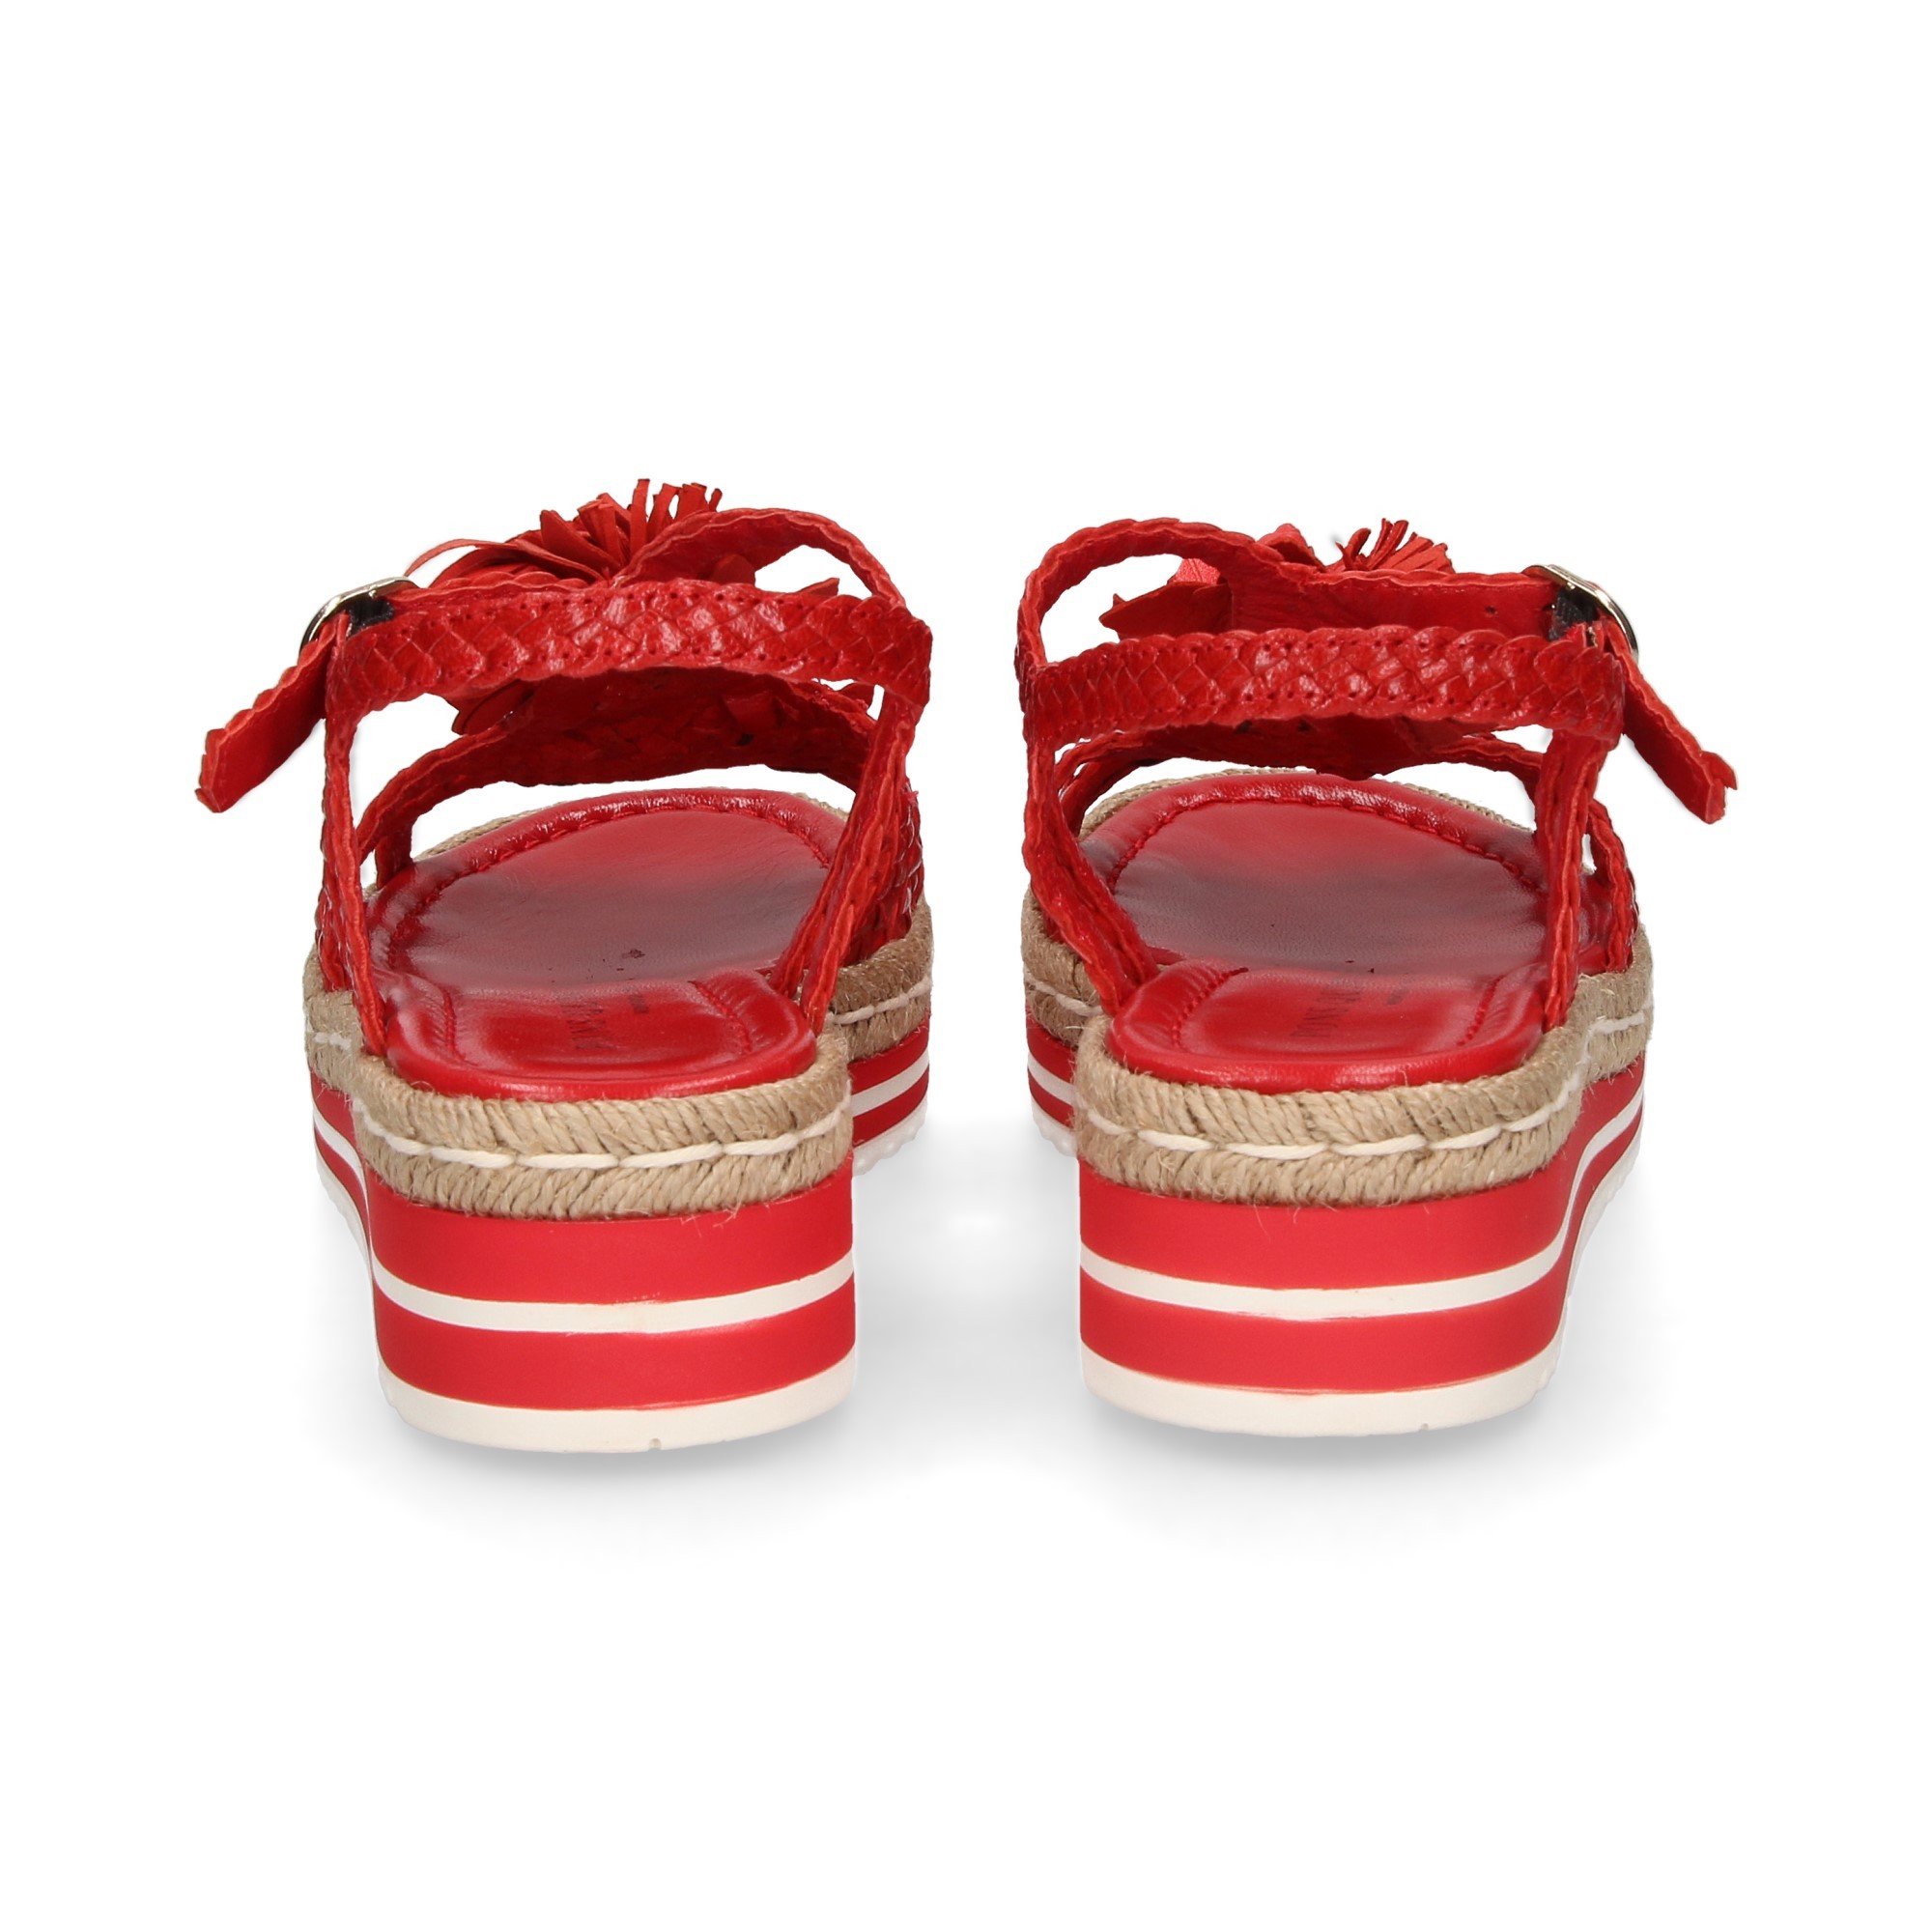 wedge-flowers-instep-braided-red-leather